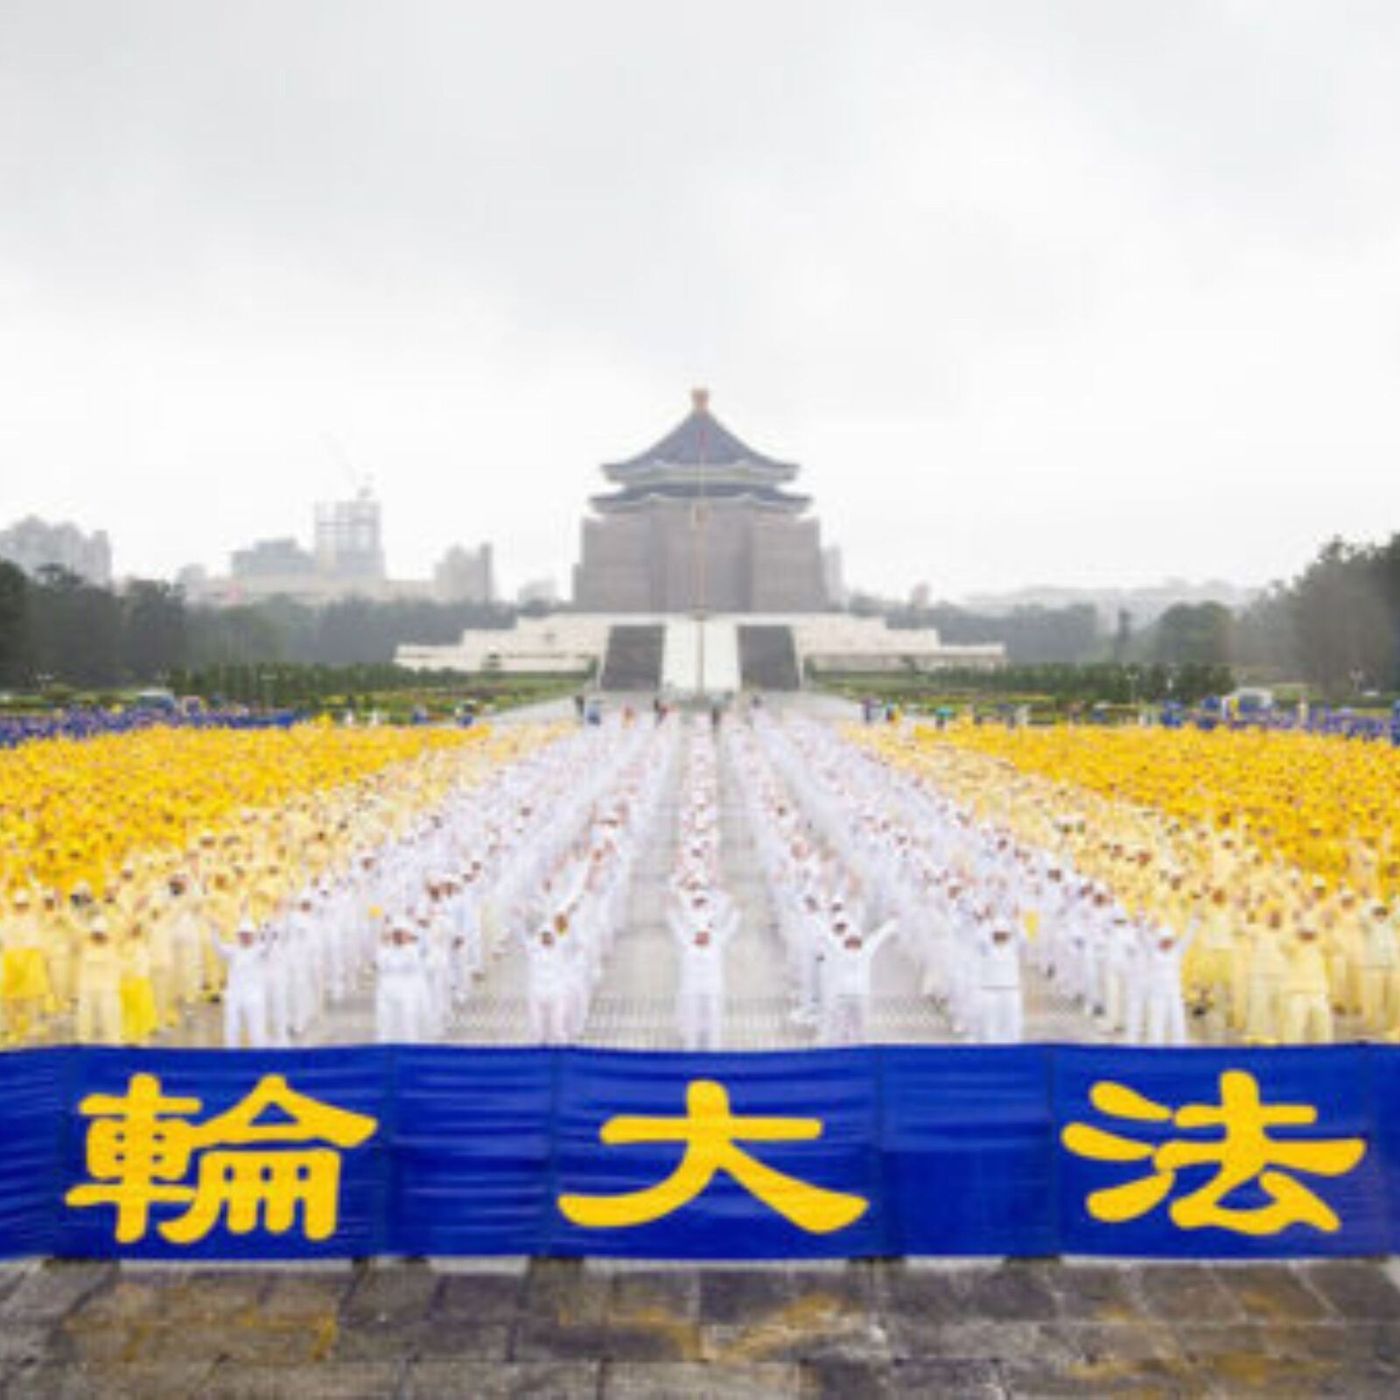 E101 - Enemy of the State: Falungong